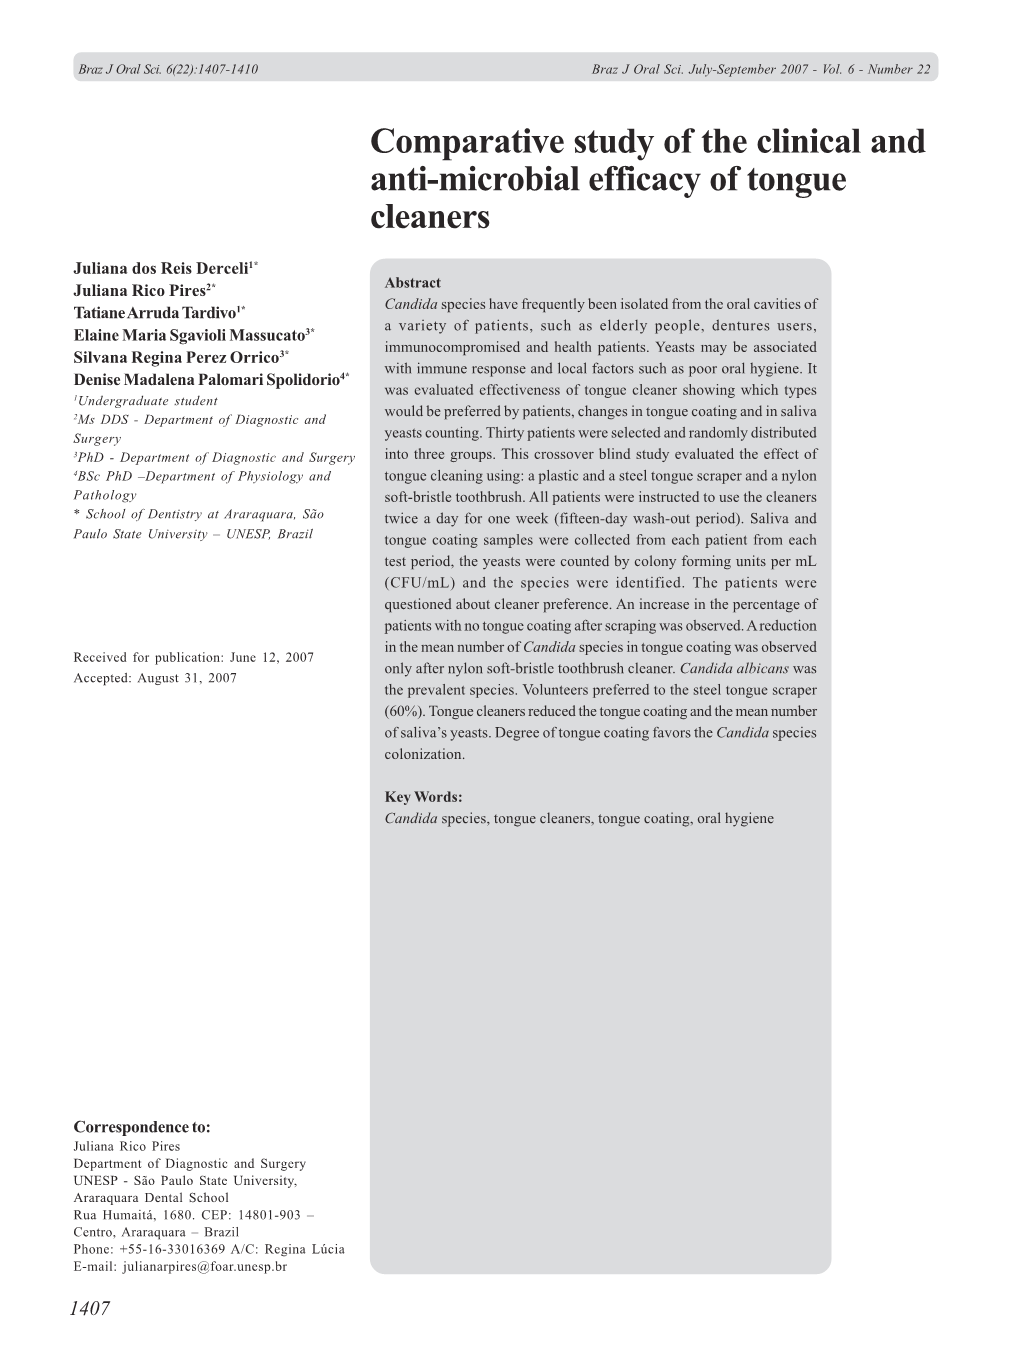 Comparative Study of the Clinical and Anti-Microbial Efficacy of Tongue Cleaners